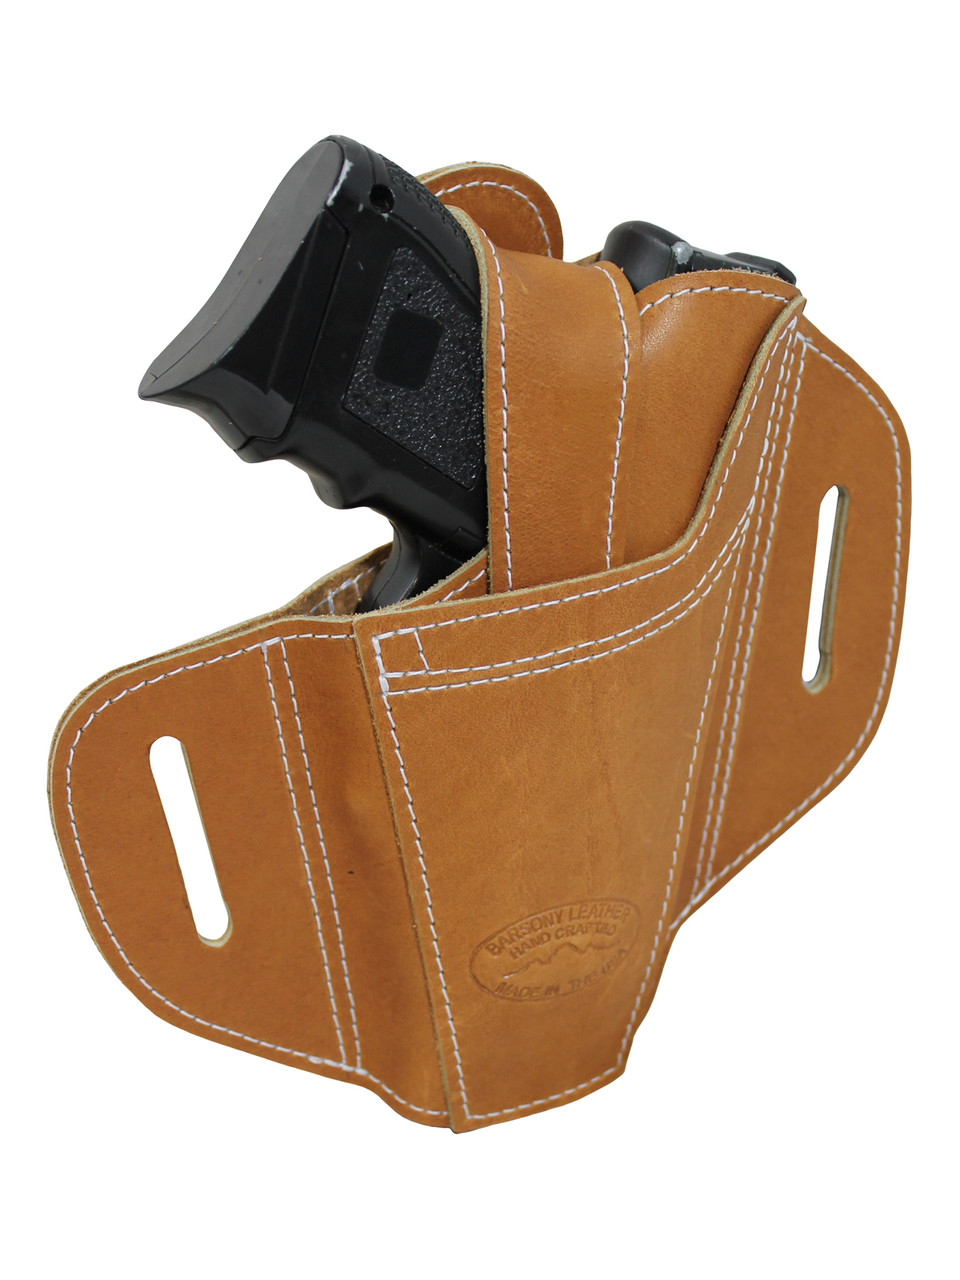 compact sub-compact 9mm 40 45 pancake holster